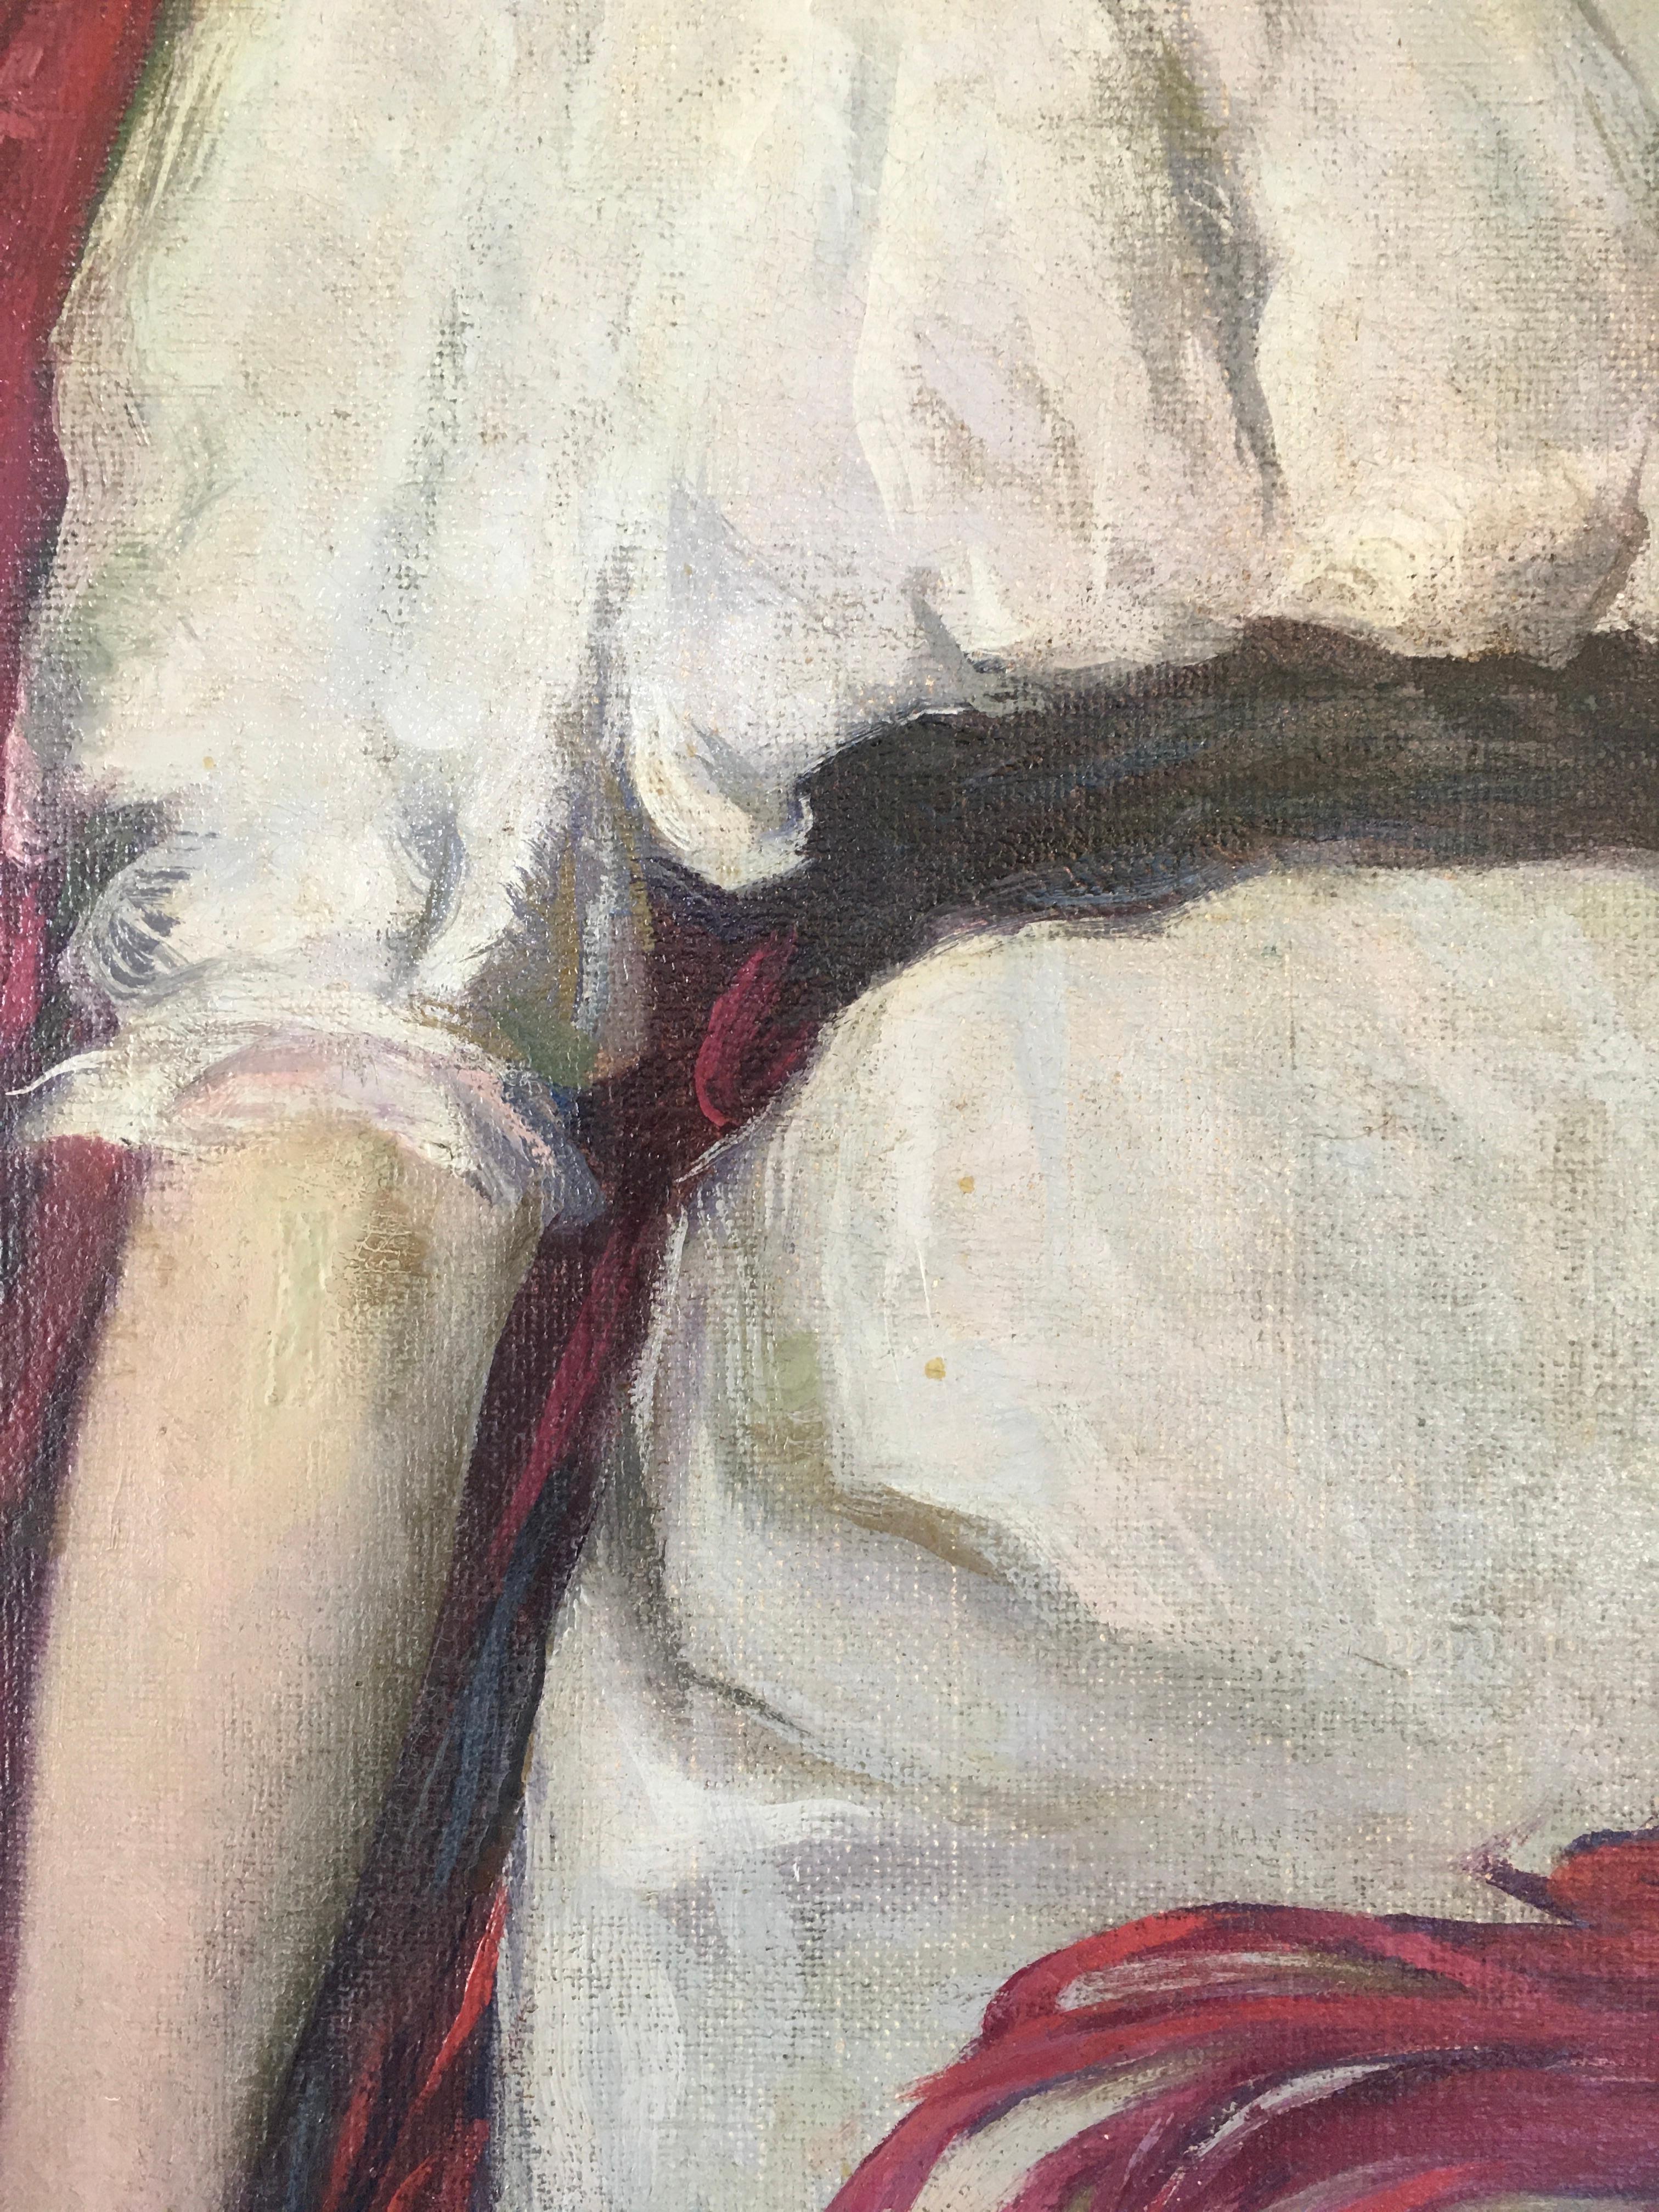 'Portrait of Lady in White', is a beautiful oil painting of a seated woman, presumably painted in the early 20th century. It is by an Unknown Artist of the Boston School. This is a 3/4ths seated portrait, not quite full body as the figure's legs